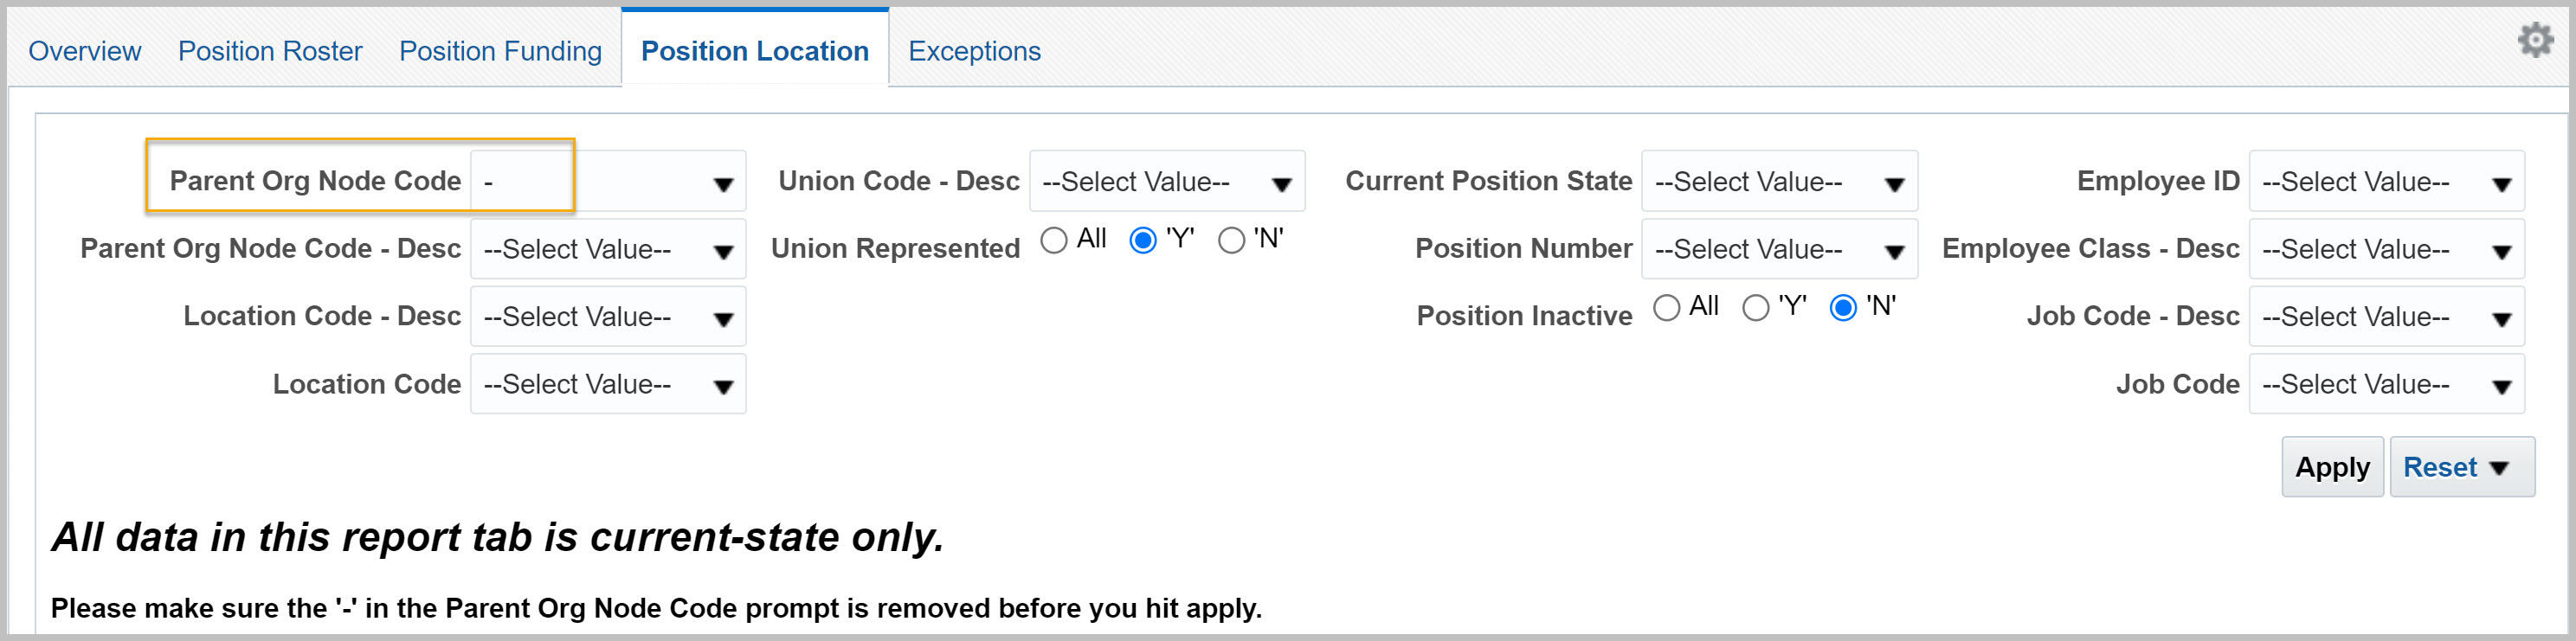 Position Management dashboard Position Location report filters